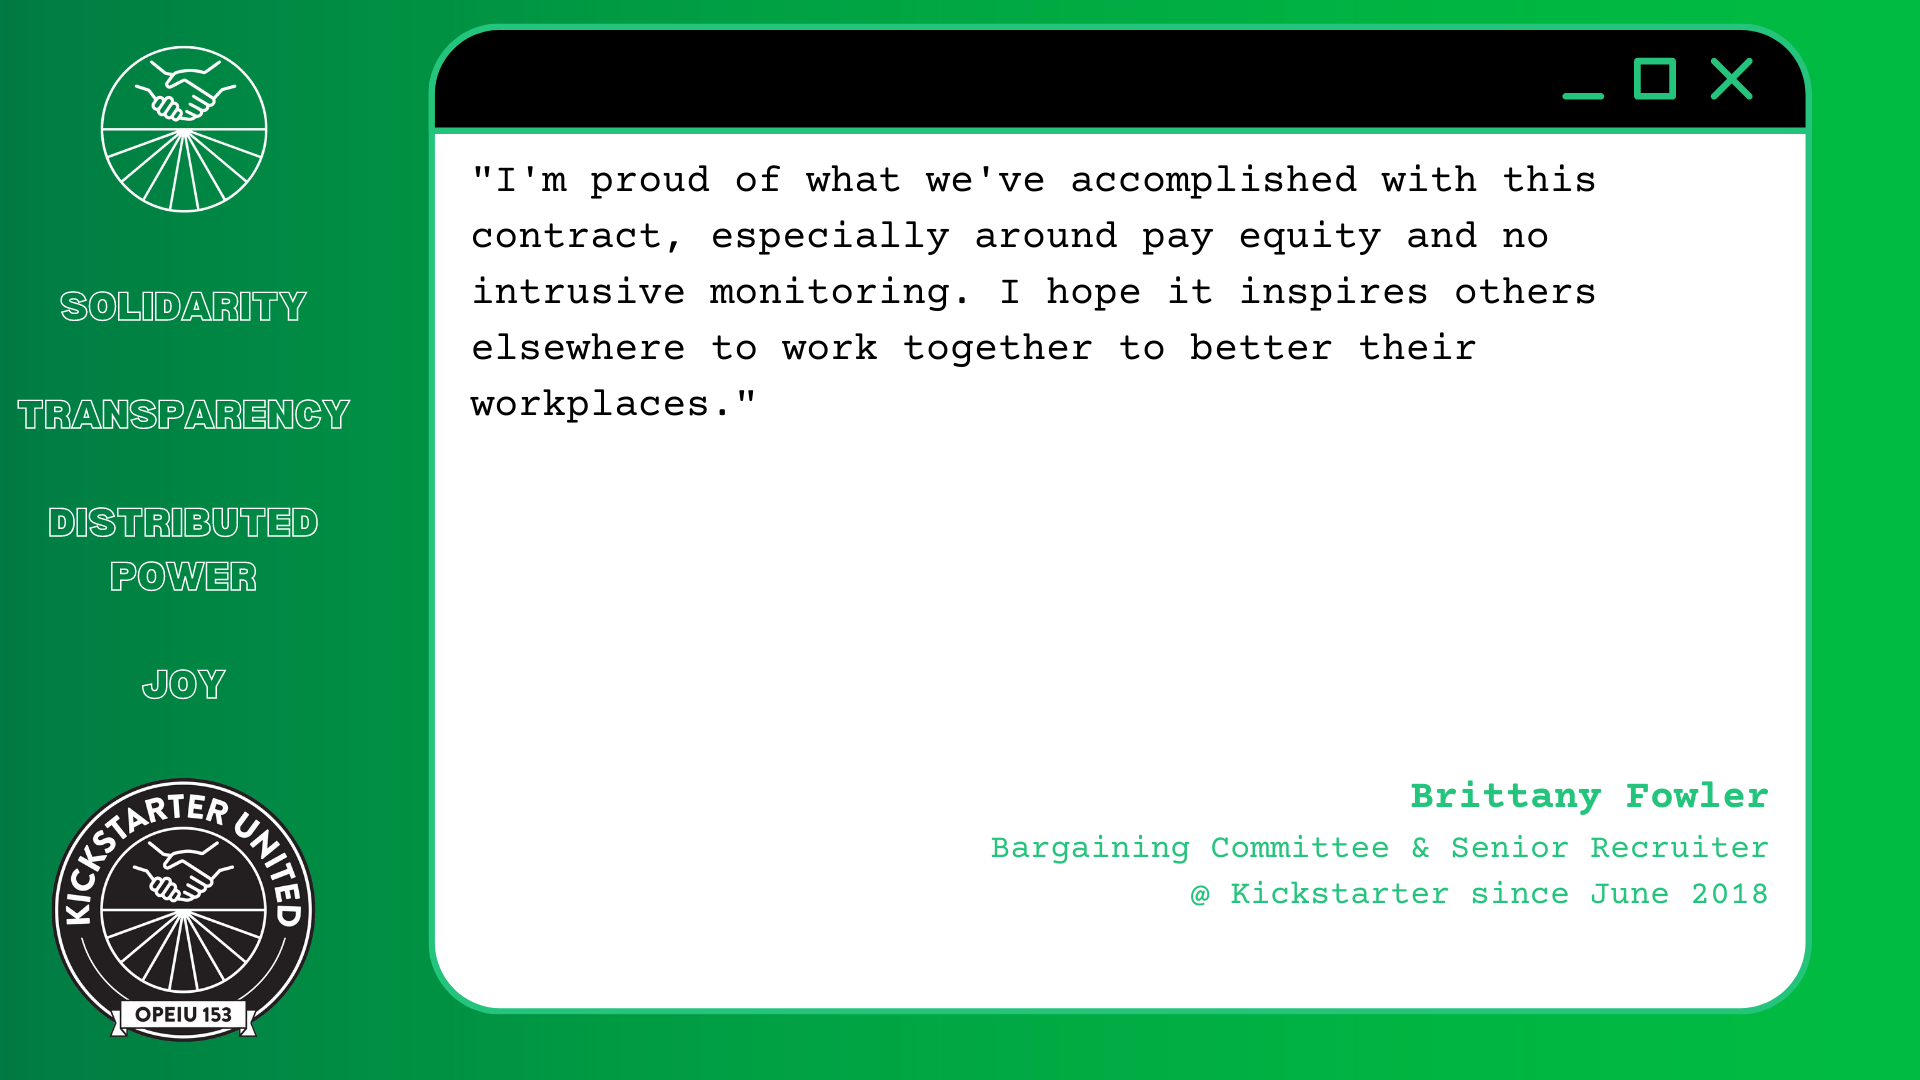 "I'm proud of what we've accomplished with this contract, especially around pay equity and no intrusive monitoring. I hope it inspires others elsewhere to work together to better their workplaces." Brittany Fowler, Bargaining Committee & Senior Recruiter @ Kickstarter since June 2018